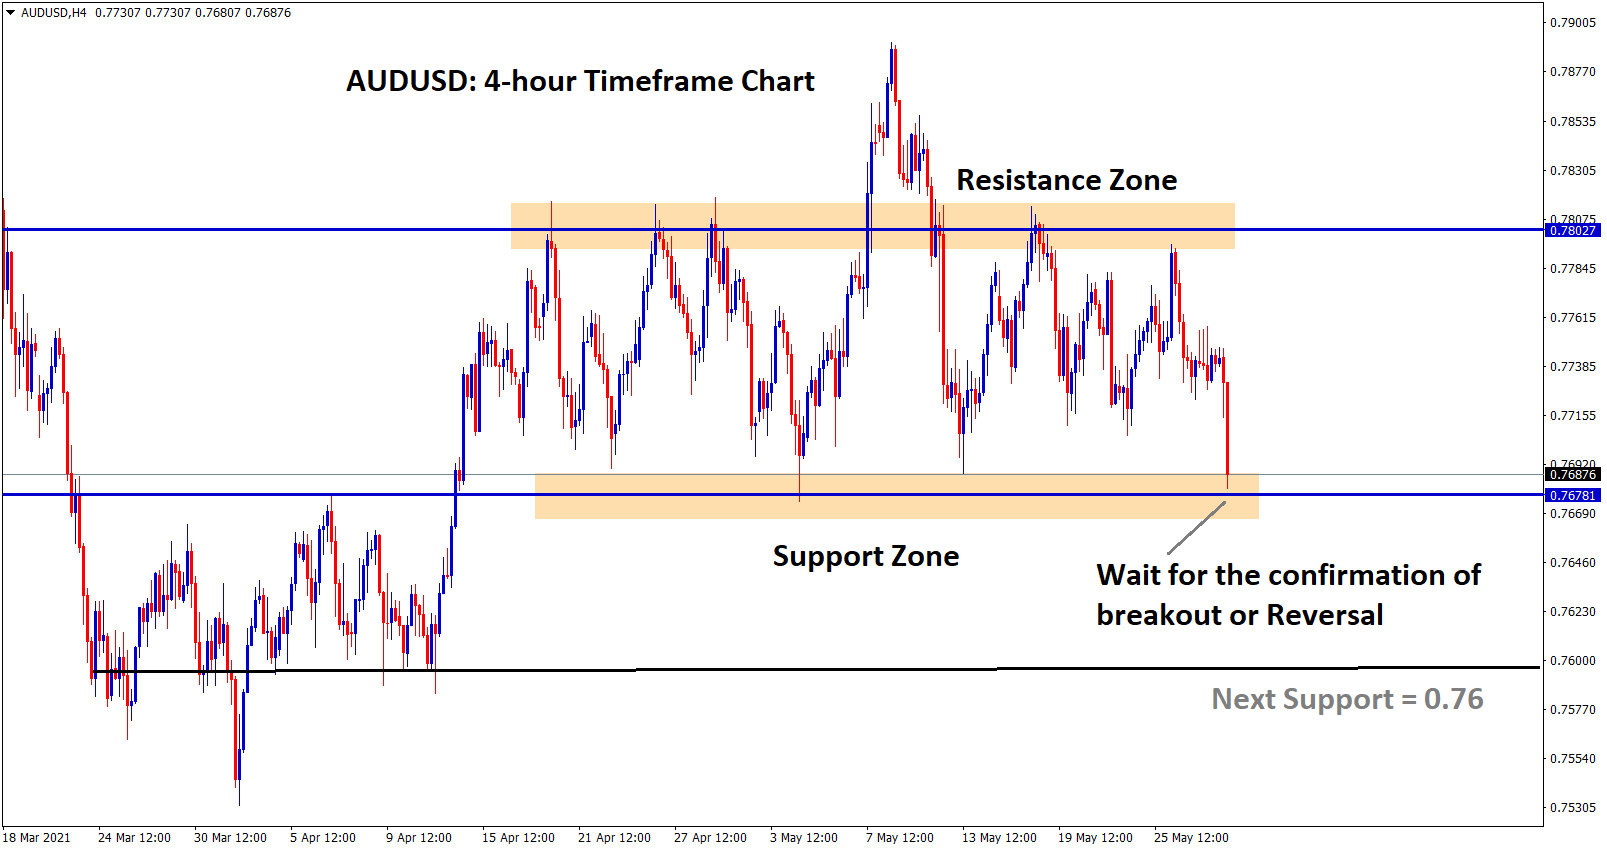 AUDUSD at the support zone wait for breakout or reversal